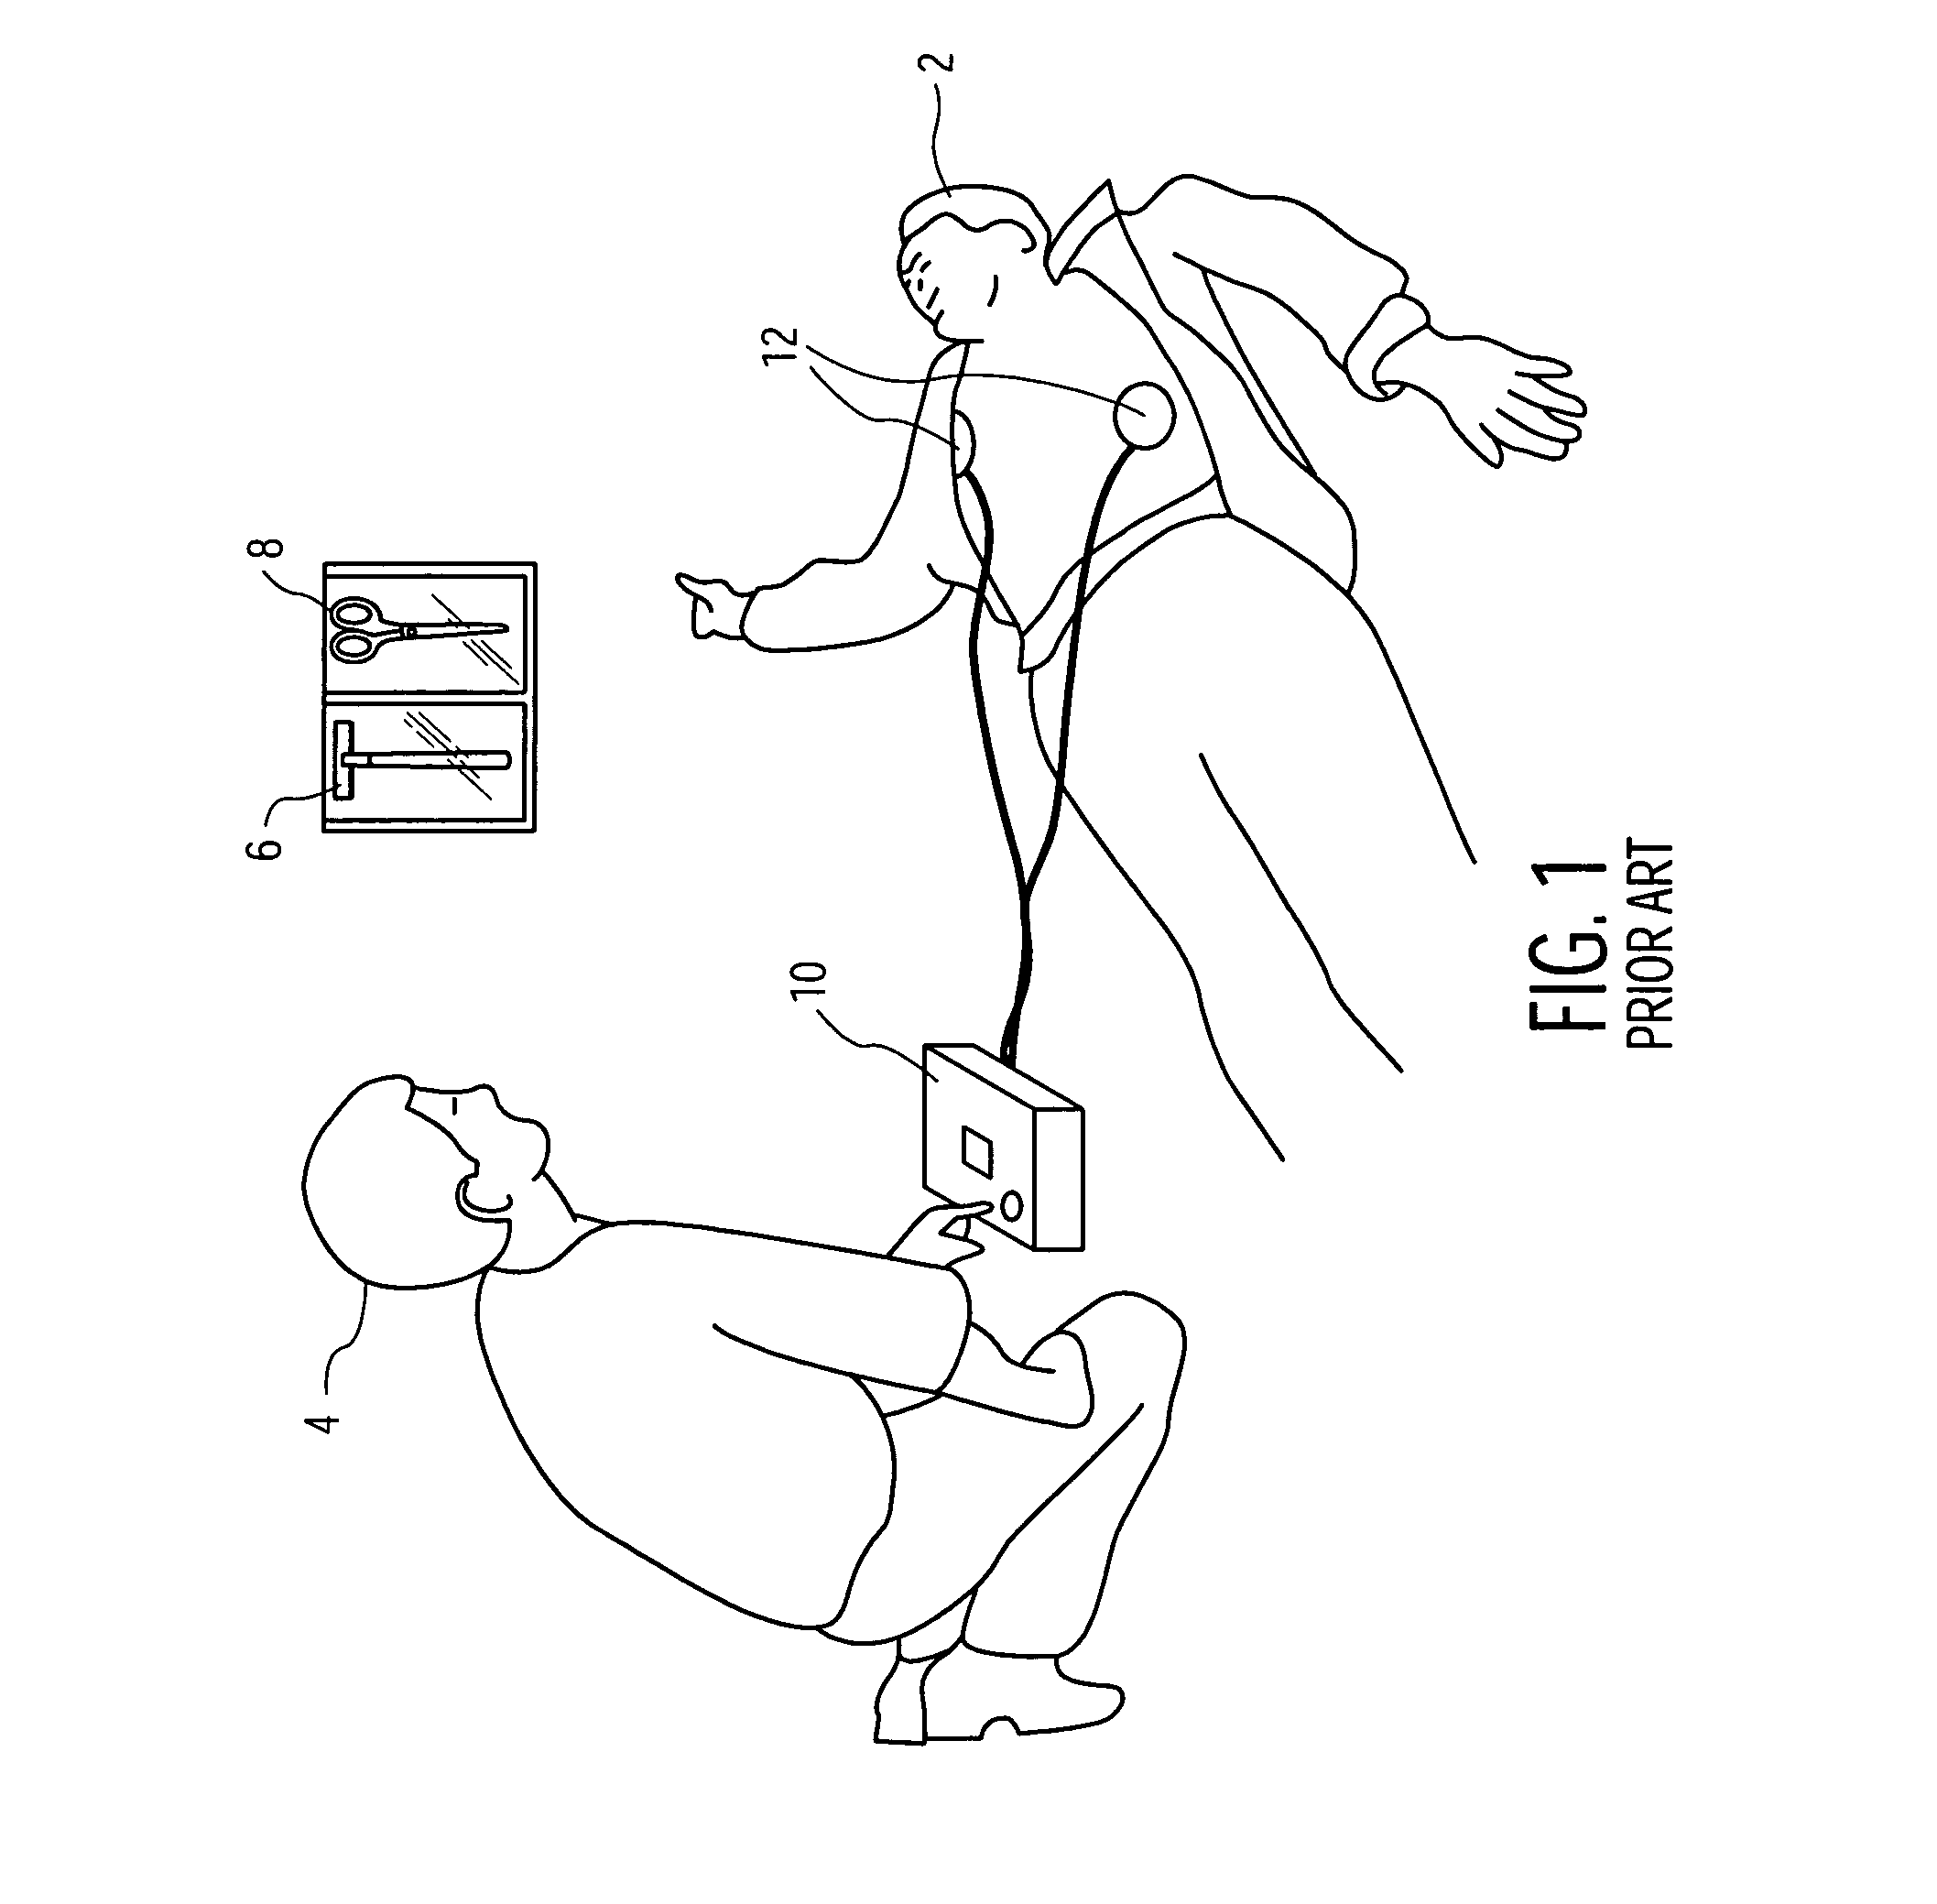 Defibrillation system and method designed for rapid attachment